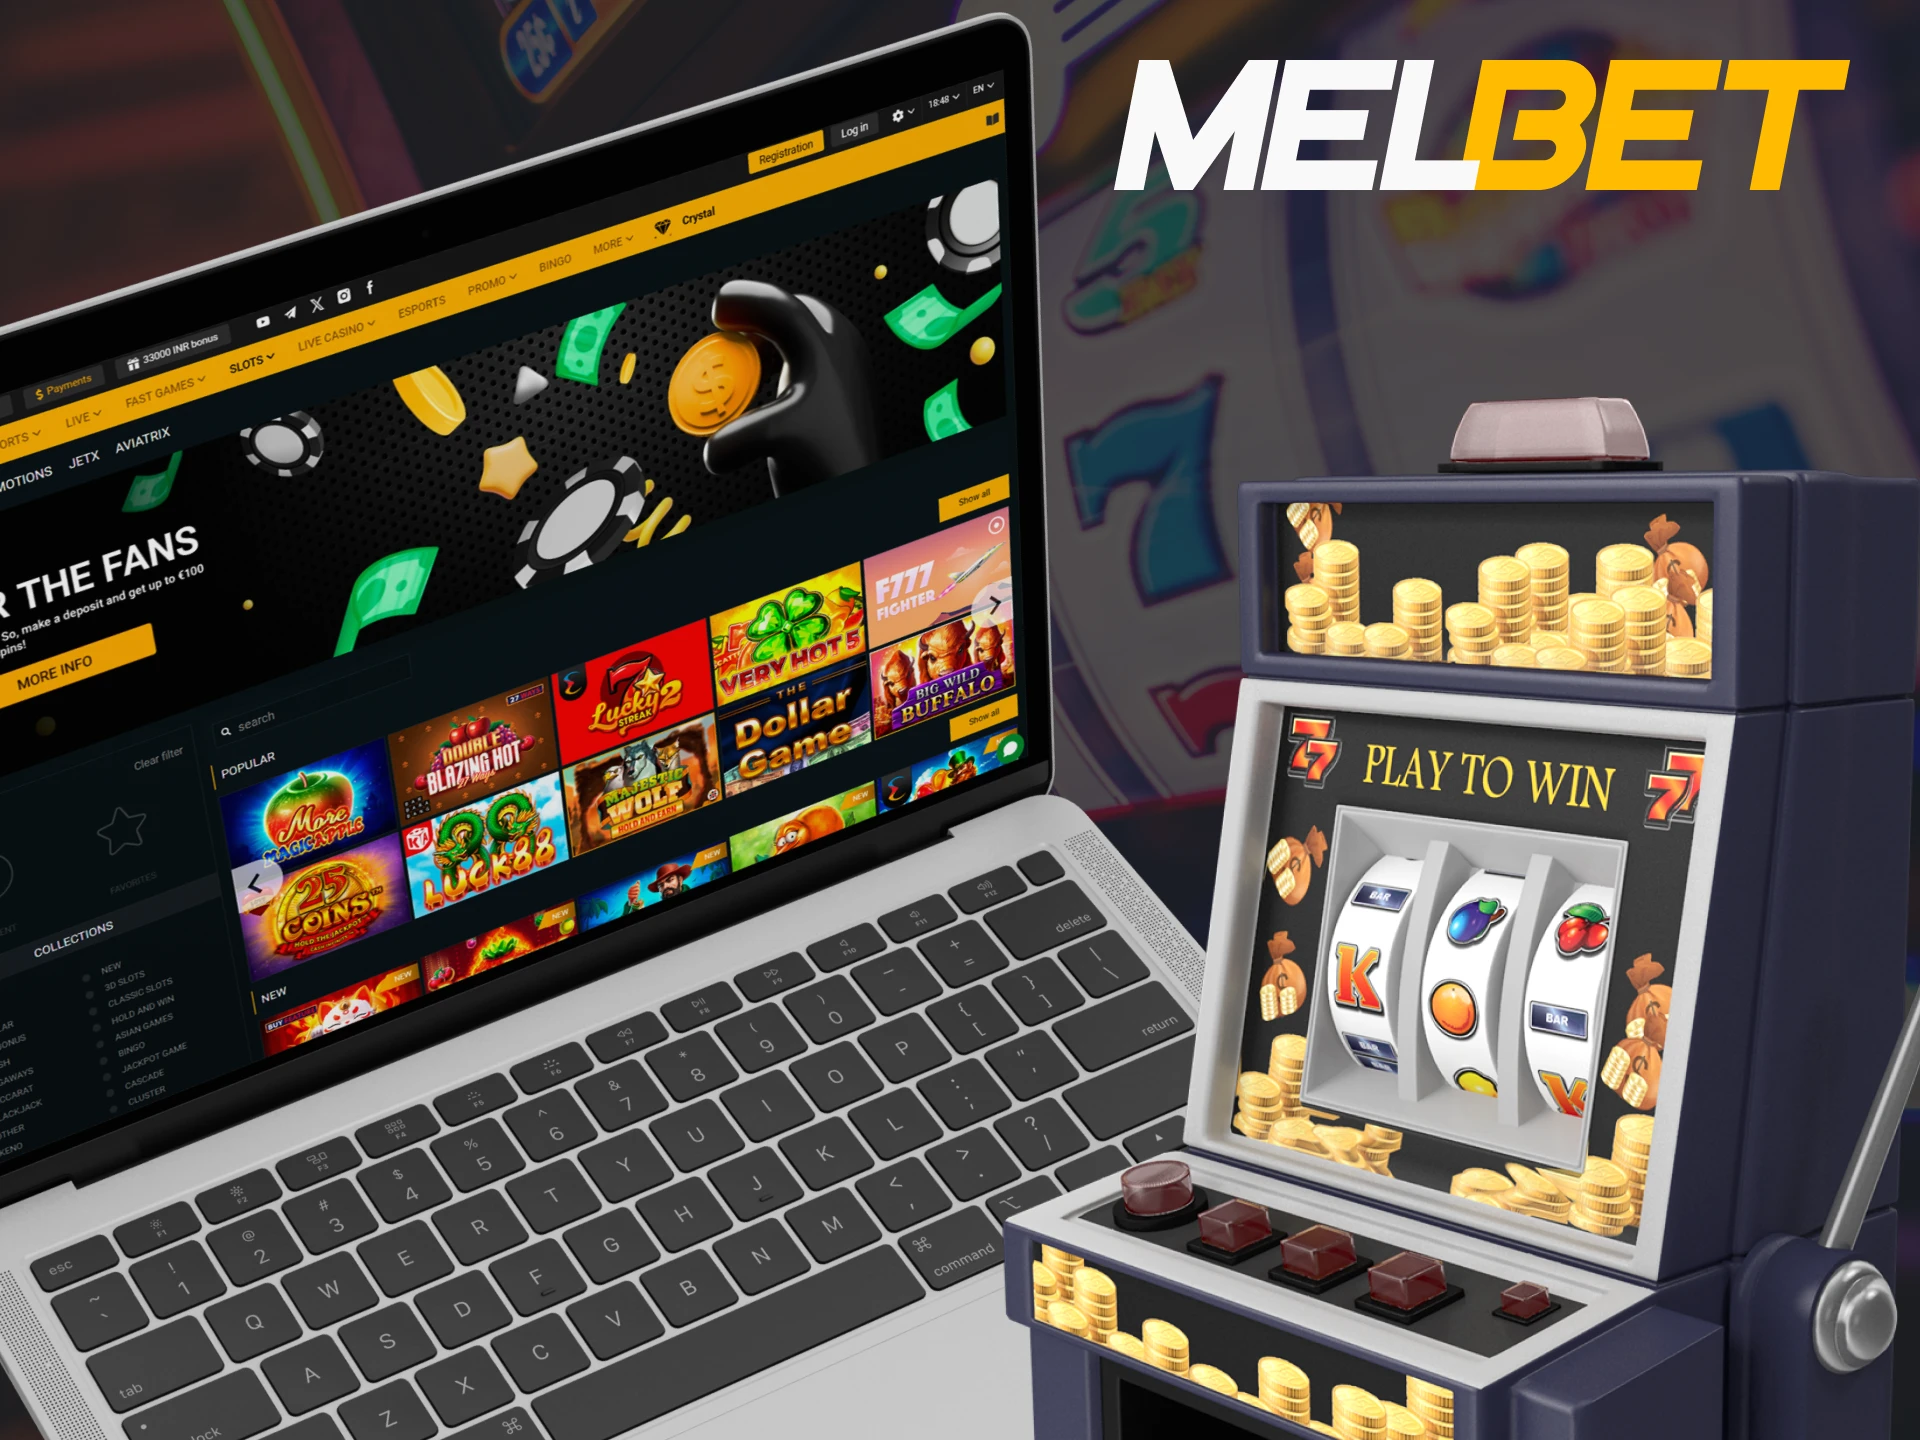 Melbet casino offers many different slots.